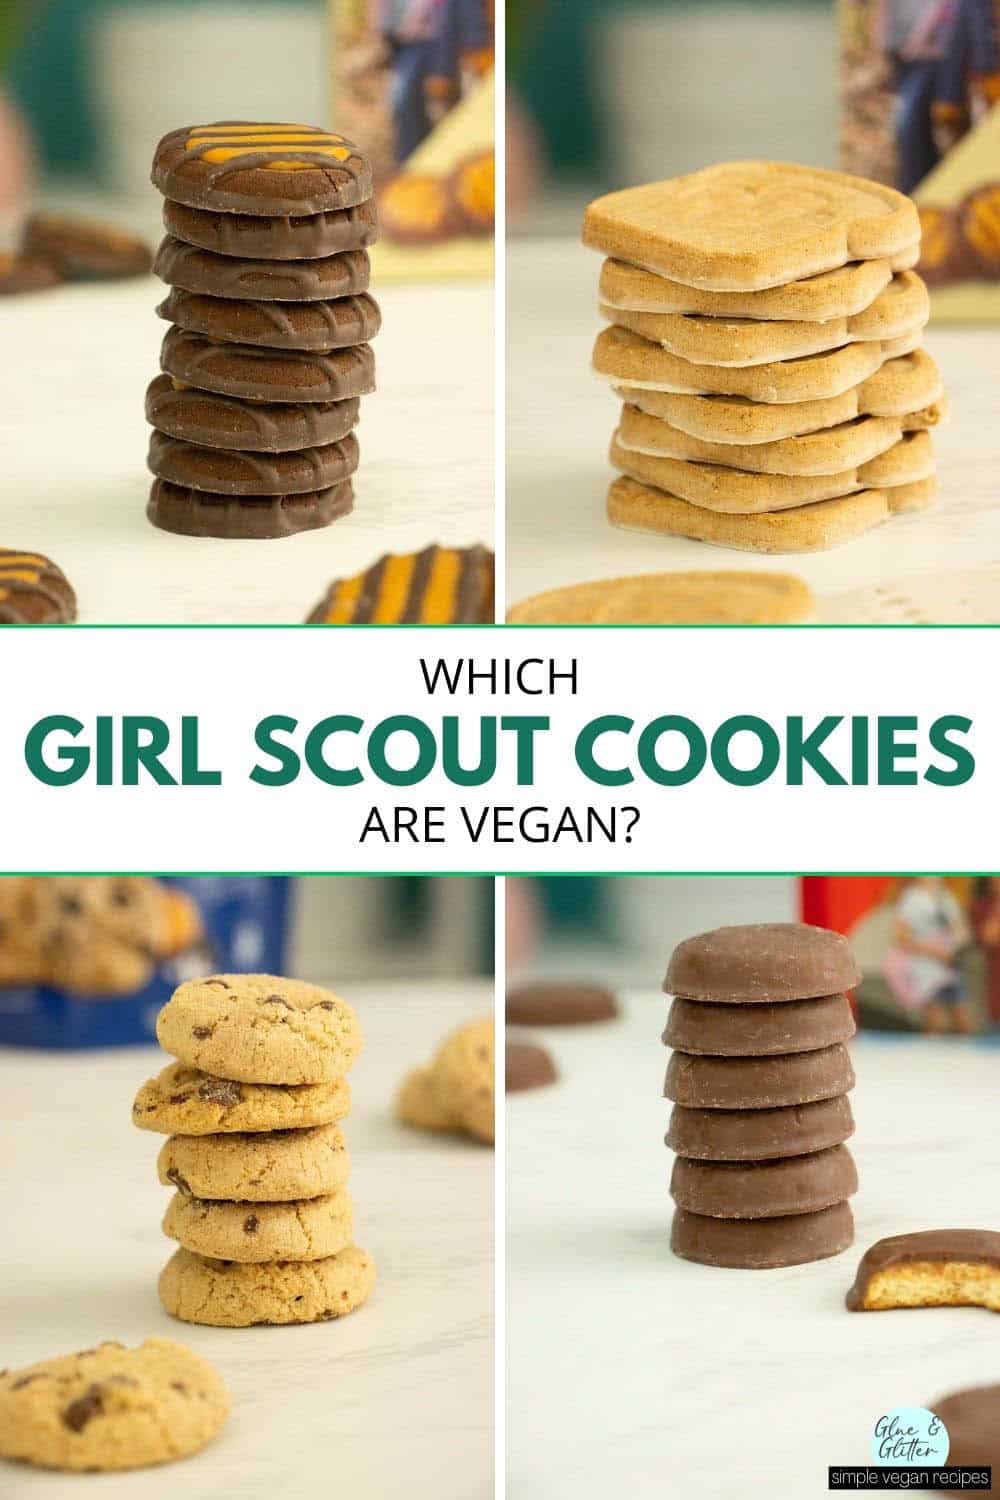 image collage of vegan Girl Scout cookies, text overlay